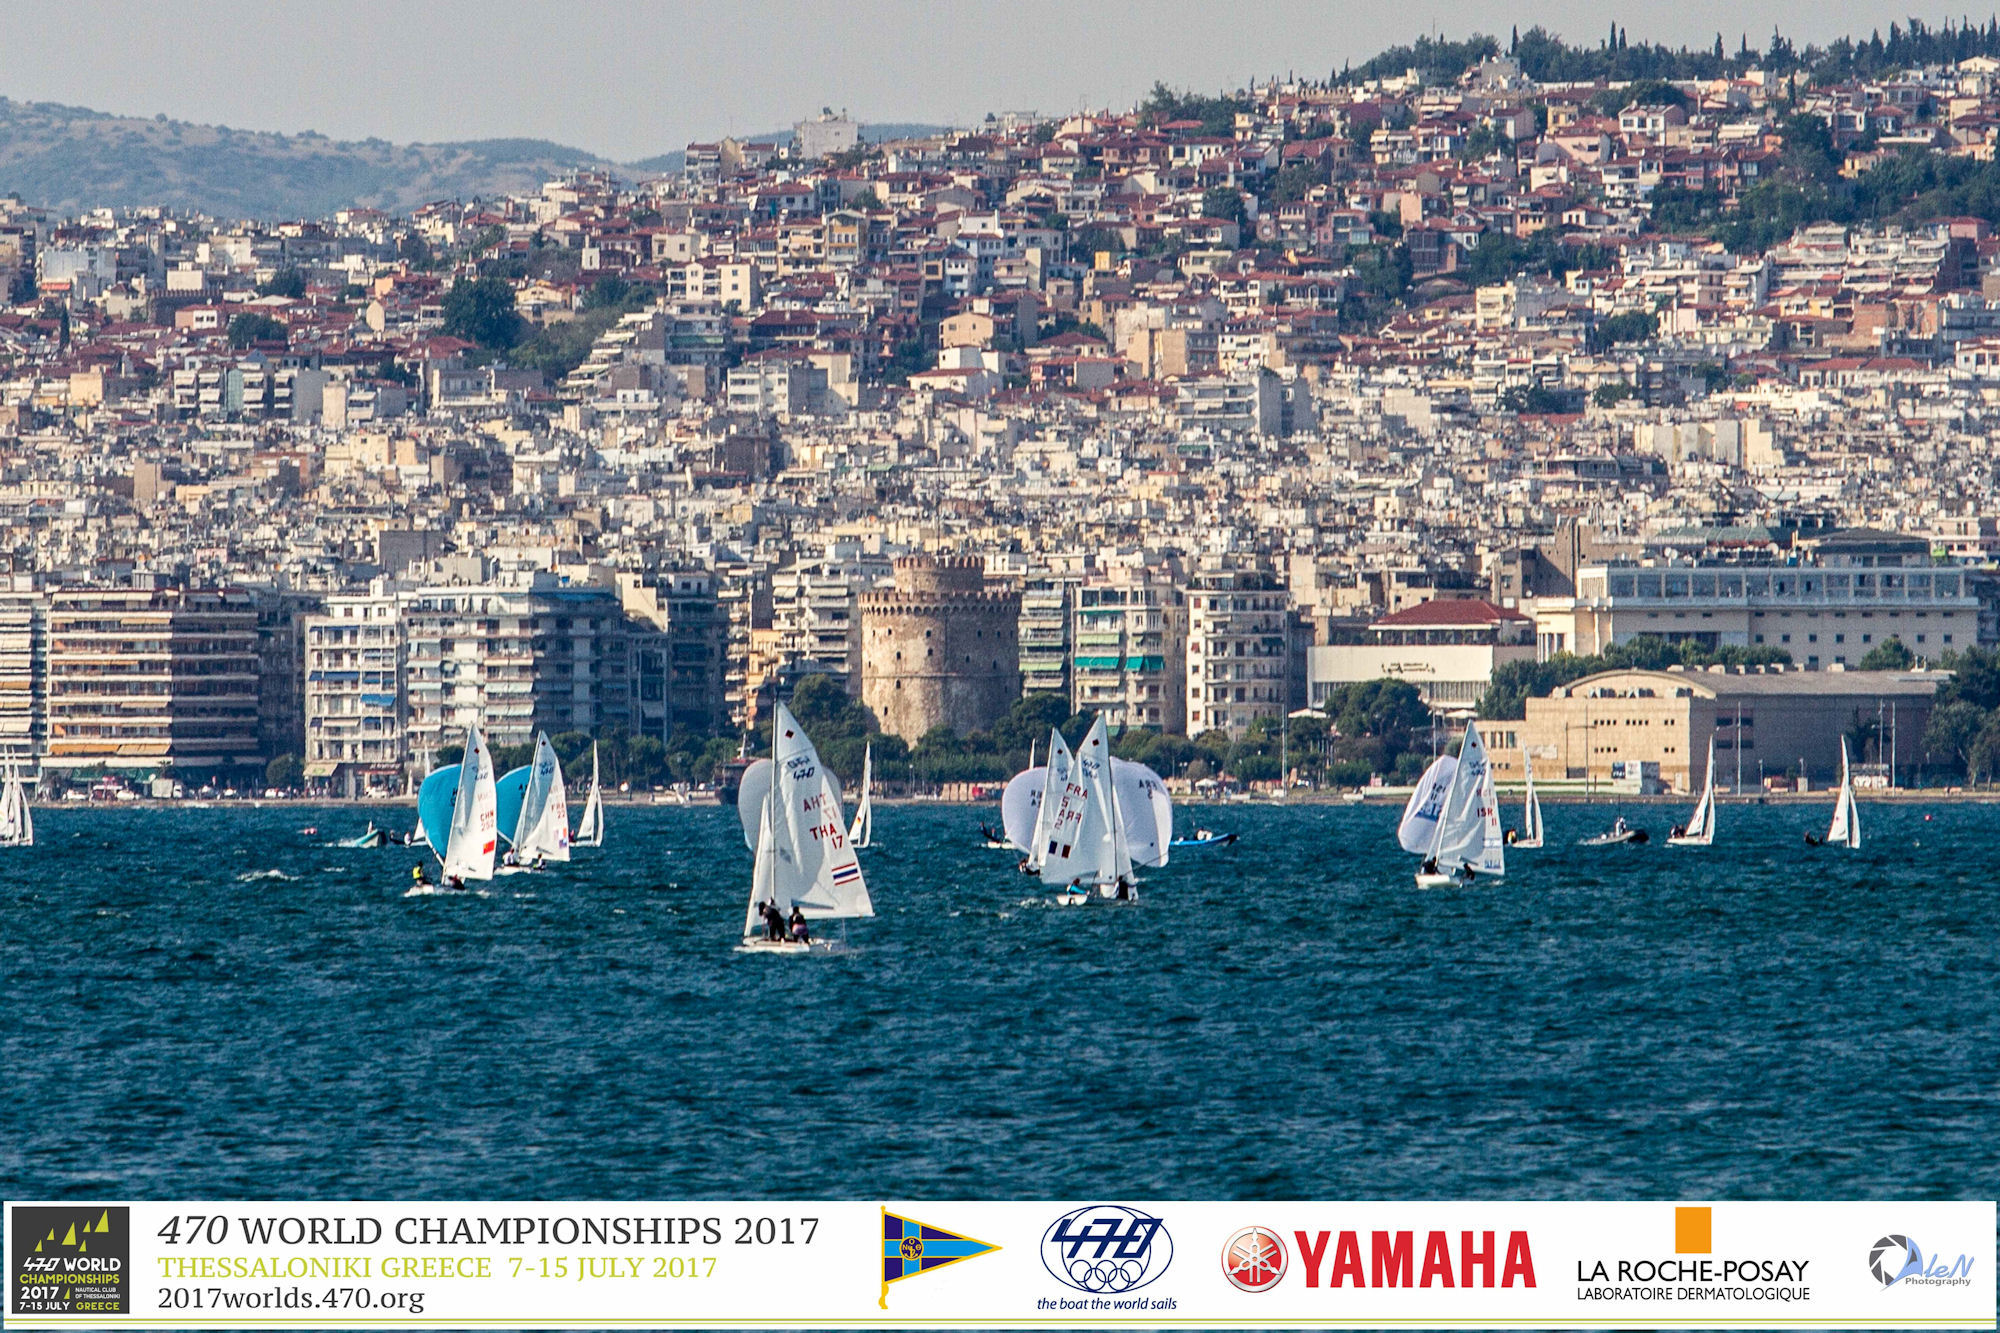 Racing at the 470 Worlds off the city of Thessaloniki